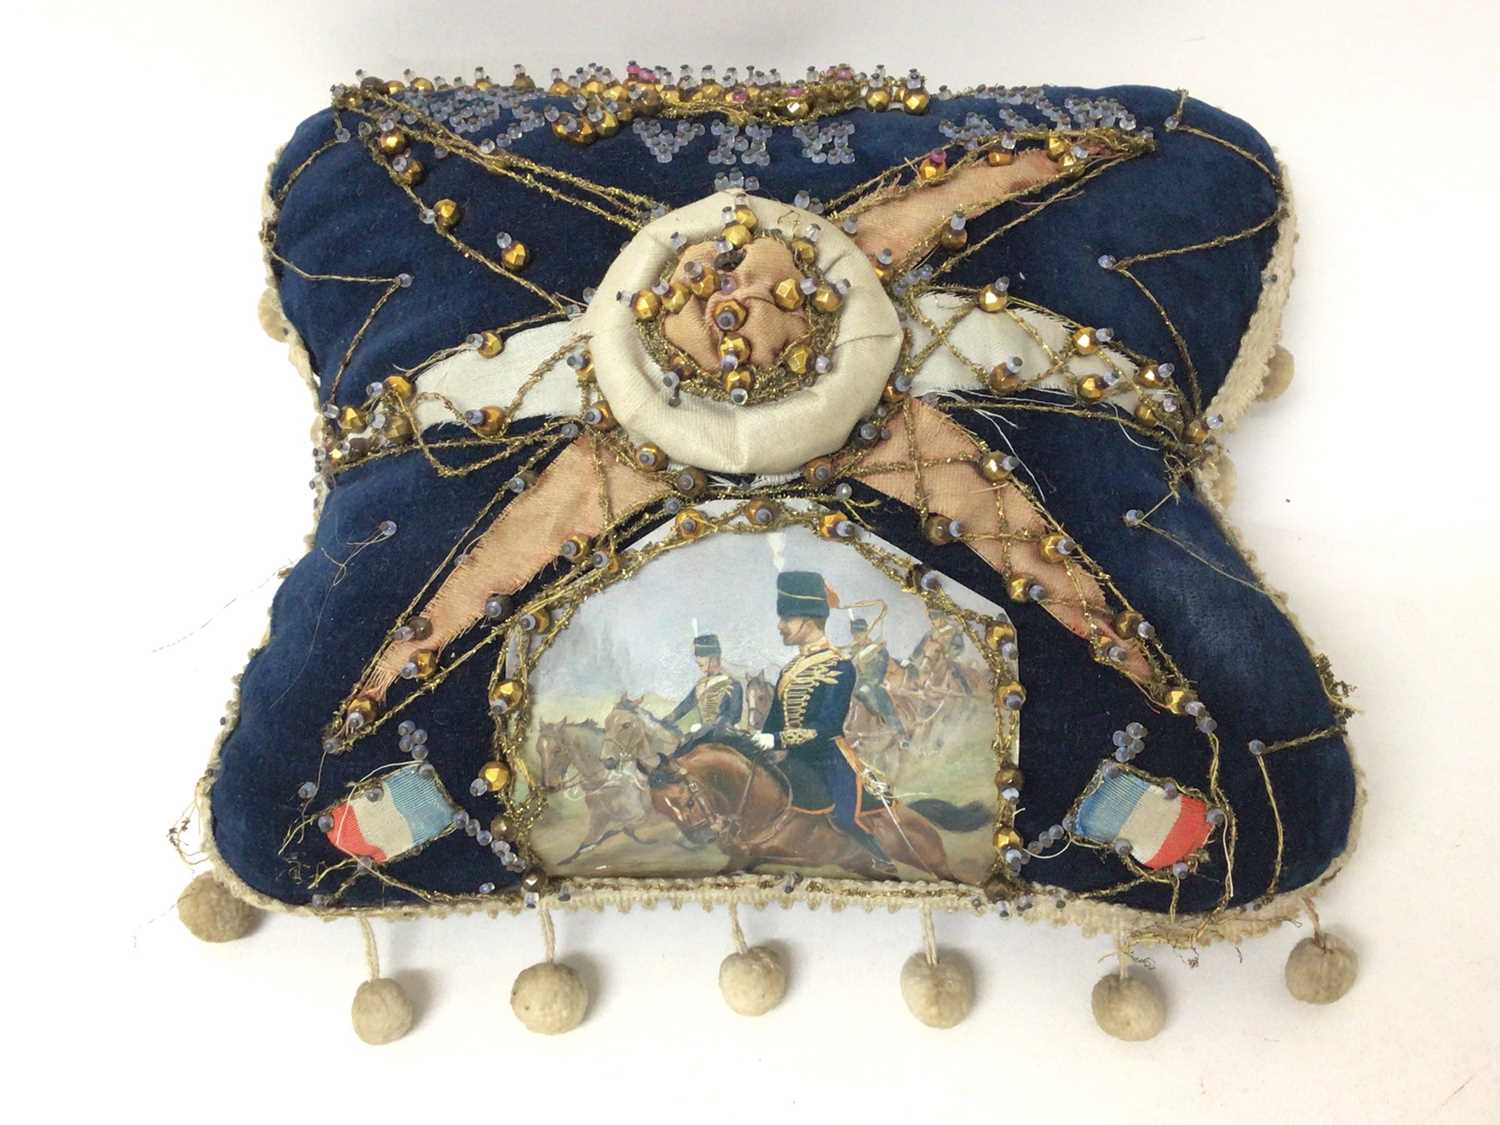 Lot 96 - Late Victorian Royal Horse Artillery Sweetheart Cushion with embroided and beaded decoration 'RHA with love G W', 18cm x 23cm